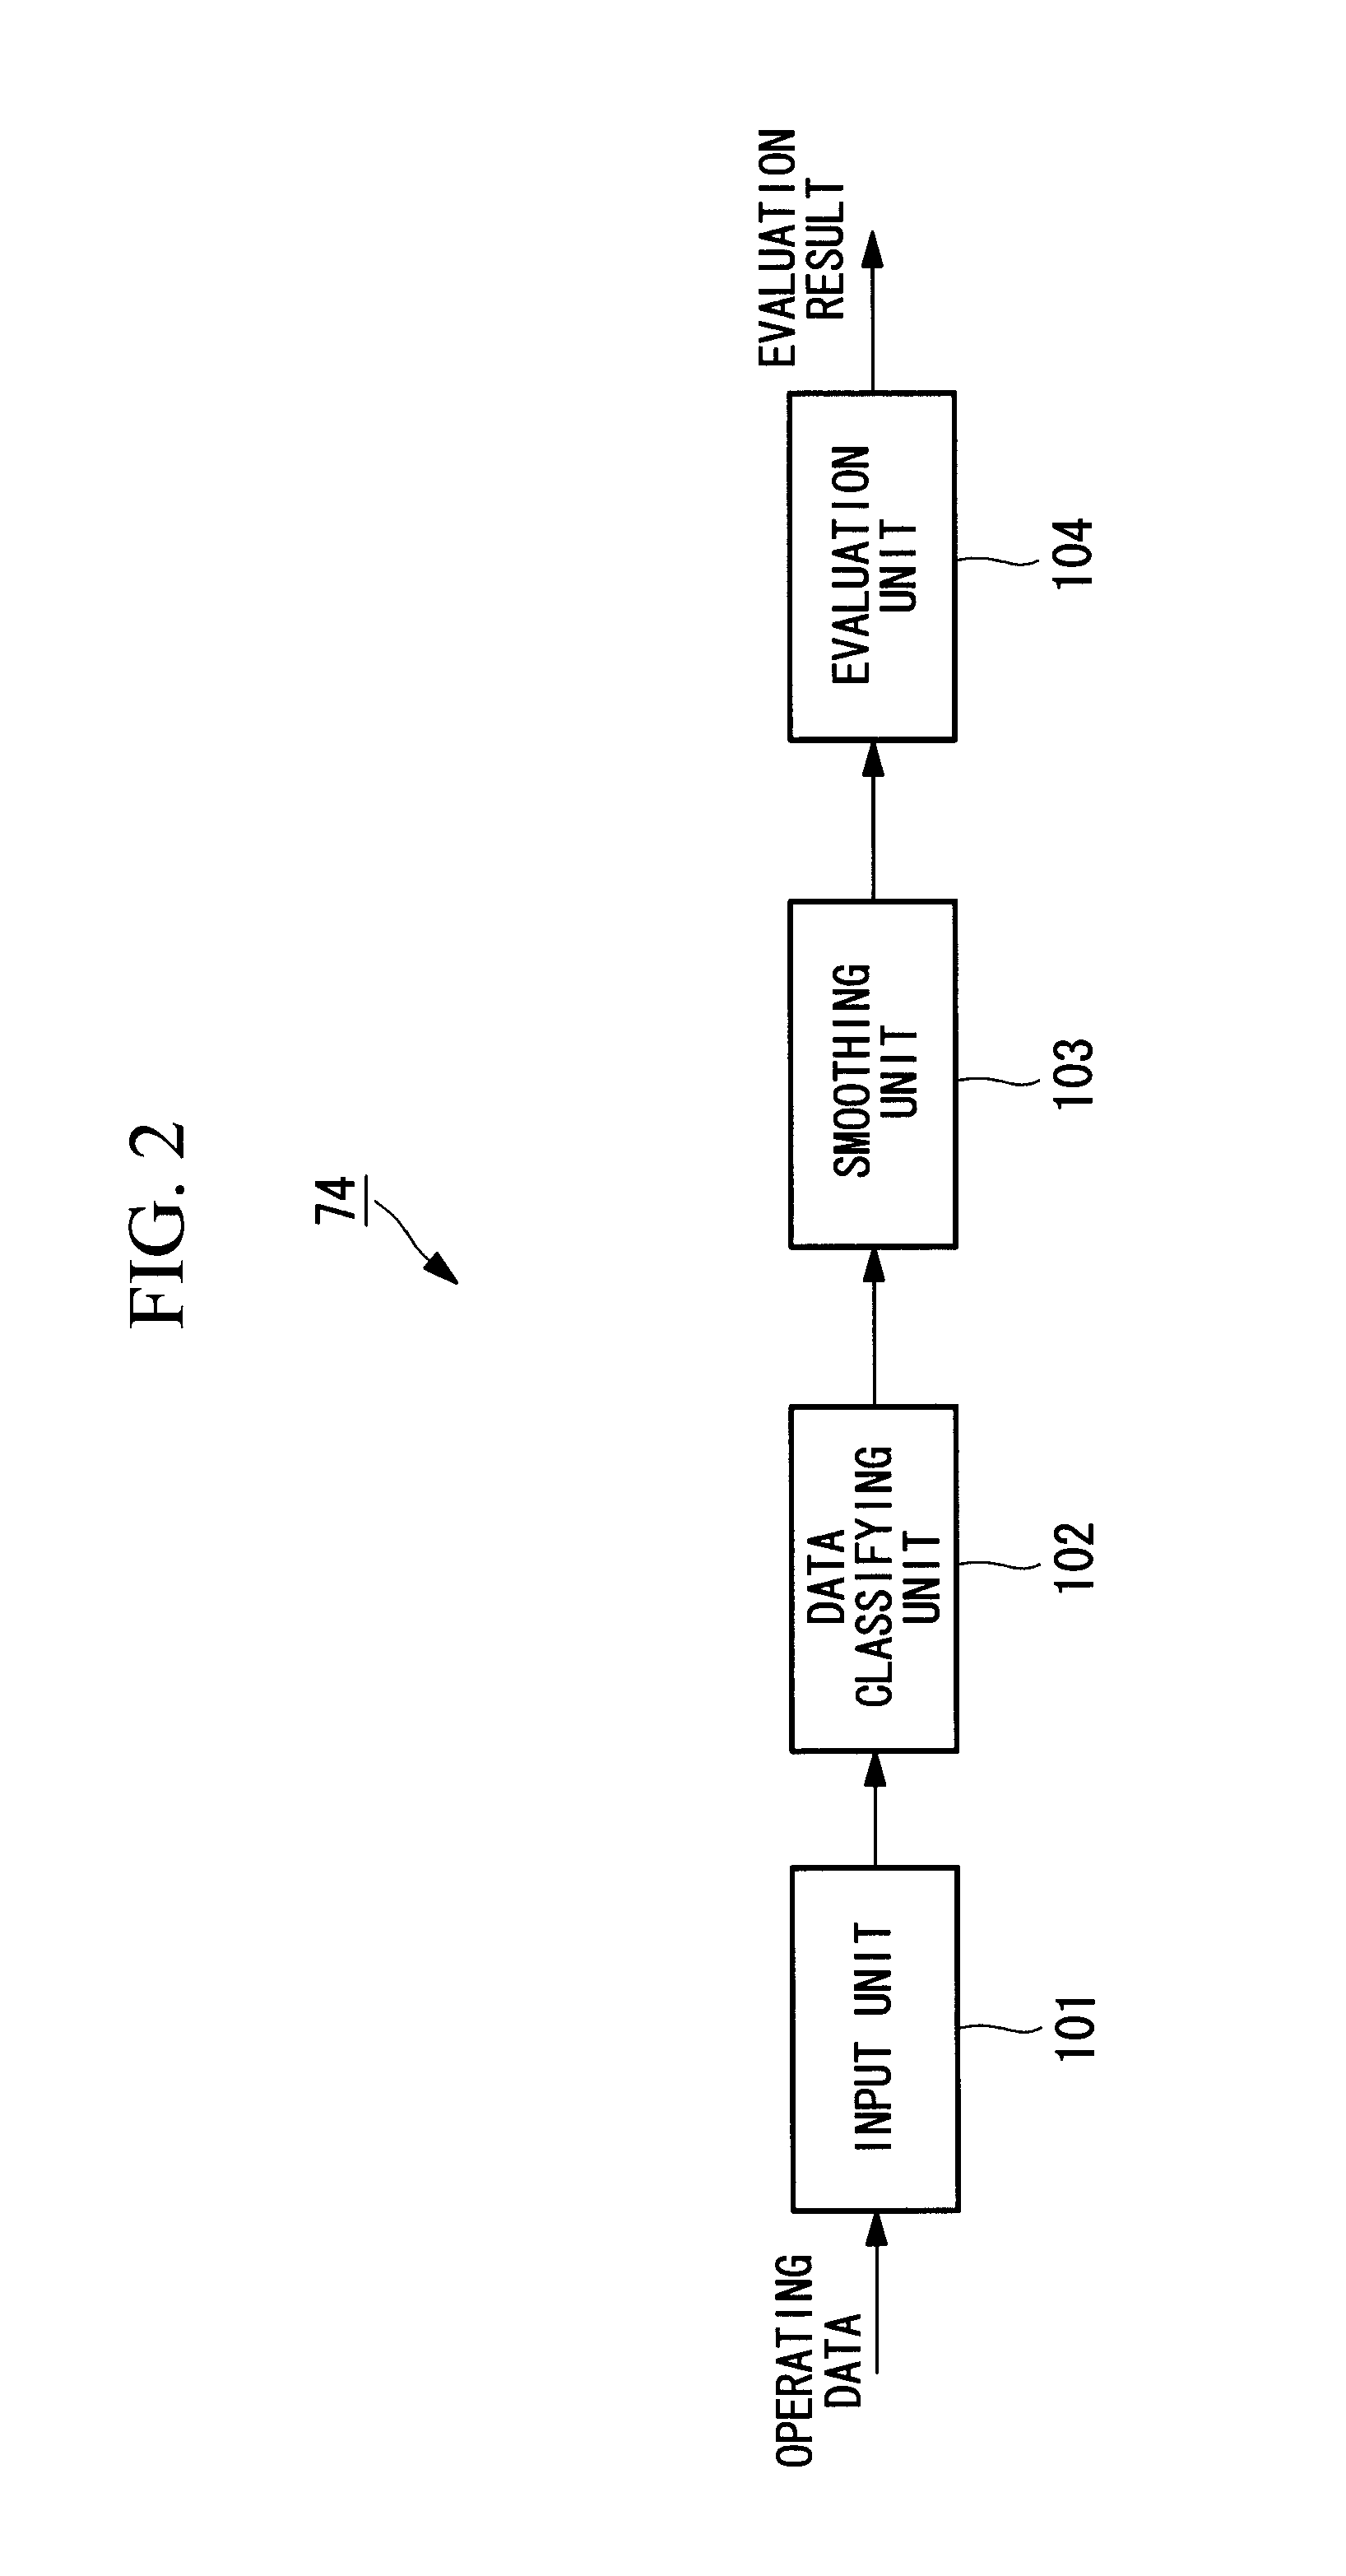 Performance evaluation device for centrifugal chiller